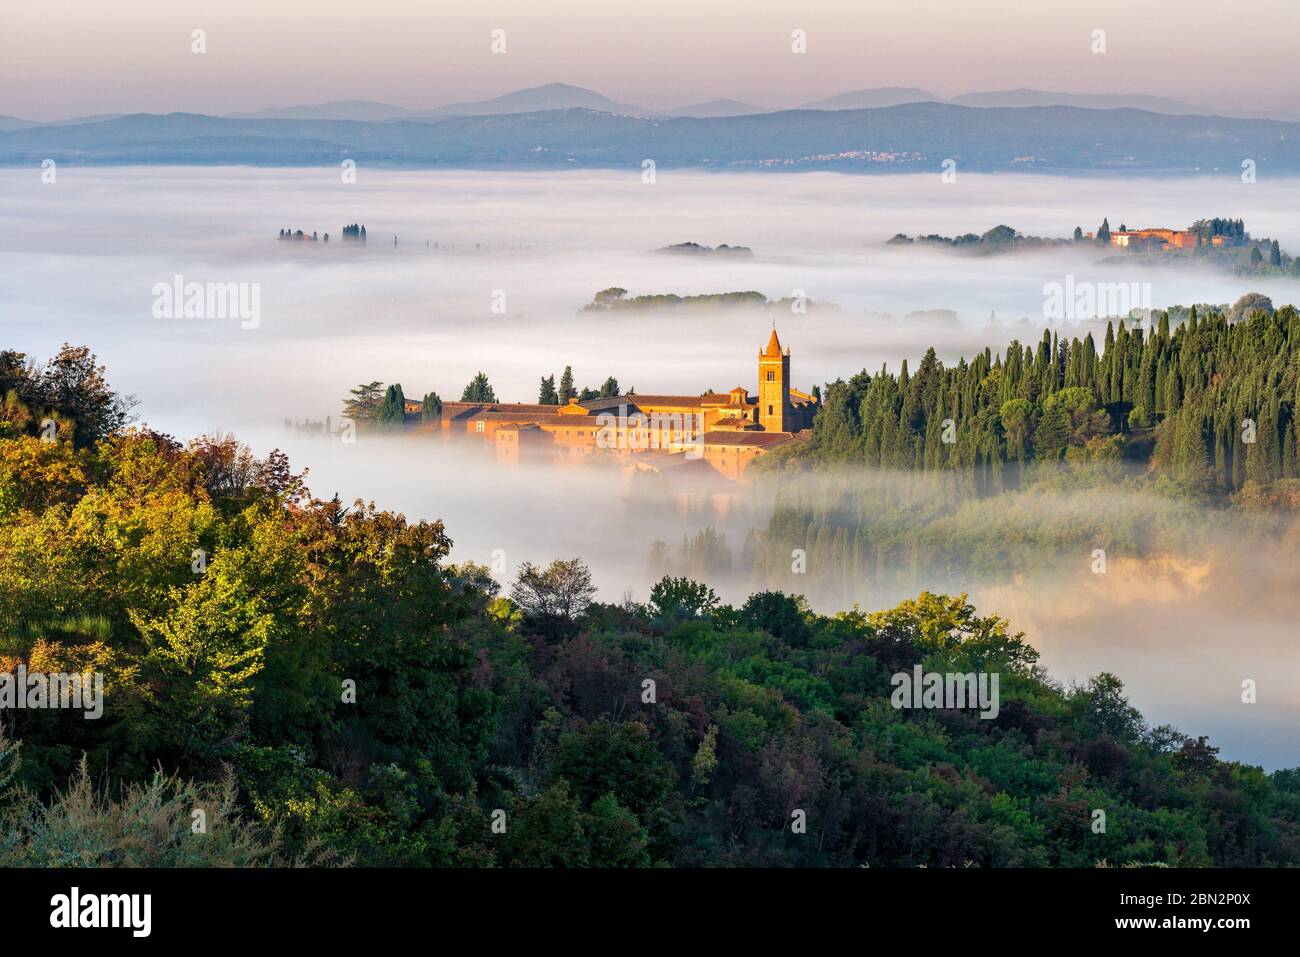 The abbey of Monte Oliveto Maggiore looks like an islands in an ocean of morning fog, crete senesi landscape, Siena, Italy Stock Photo